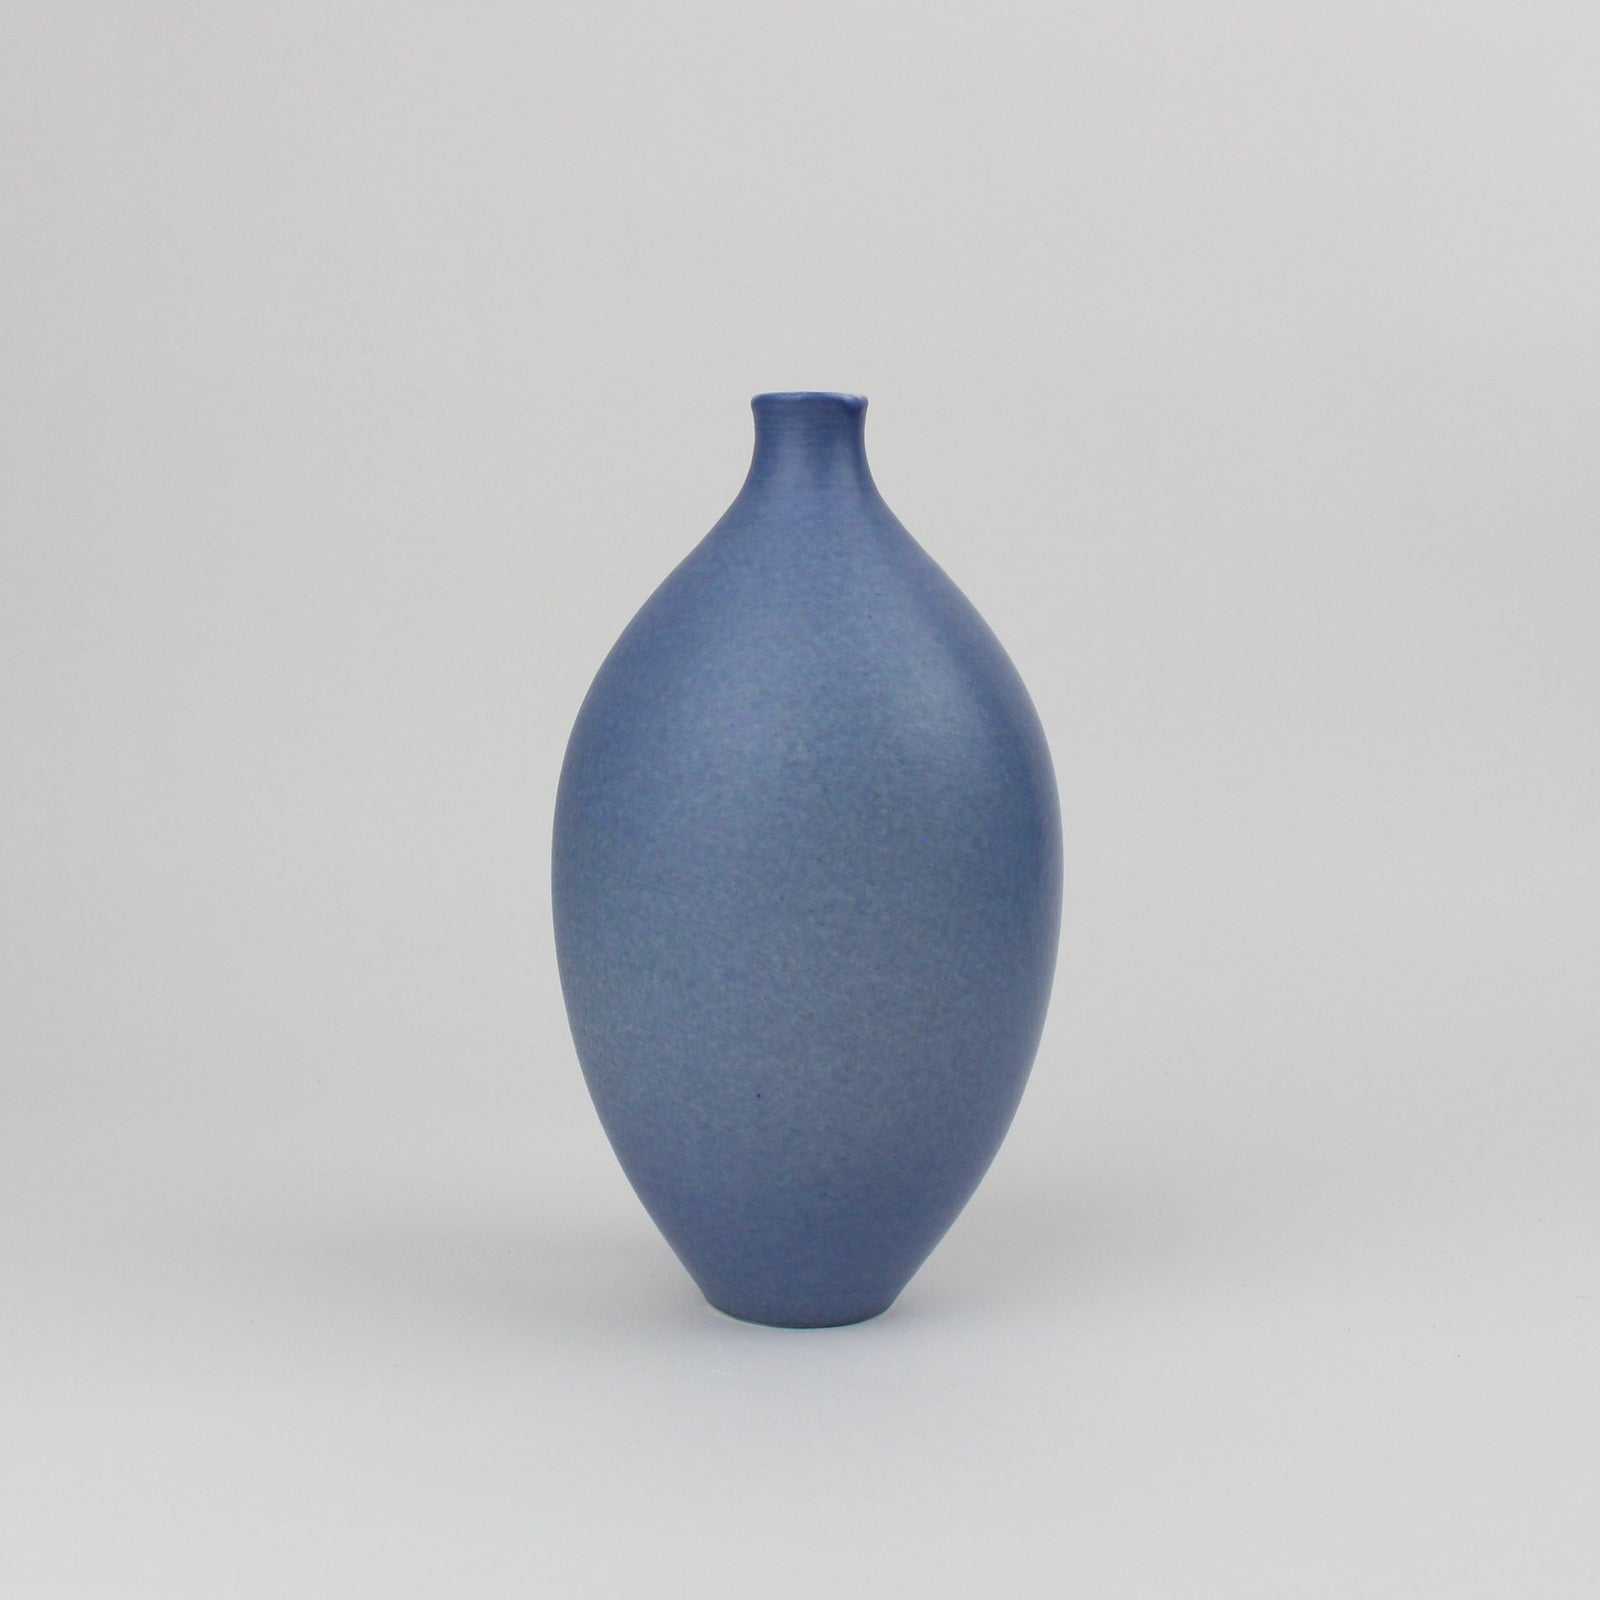 LB179 Sea Blue Oval Vase by Lucy Burley, available at Padstow Gallery, Cornwall